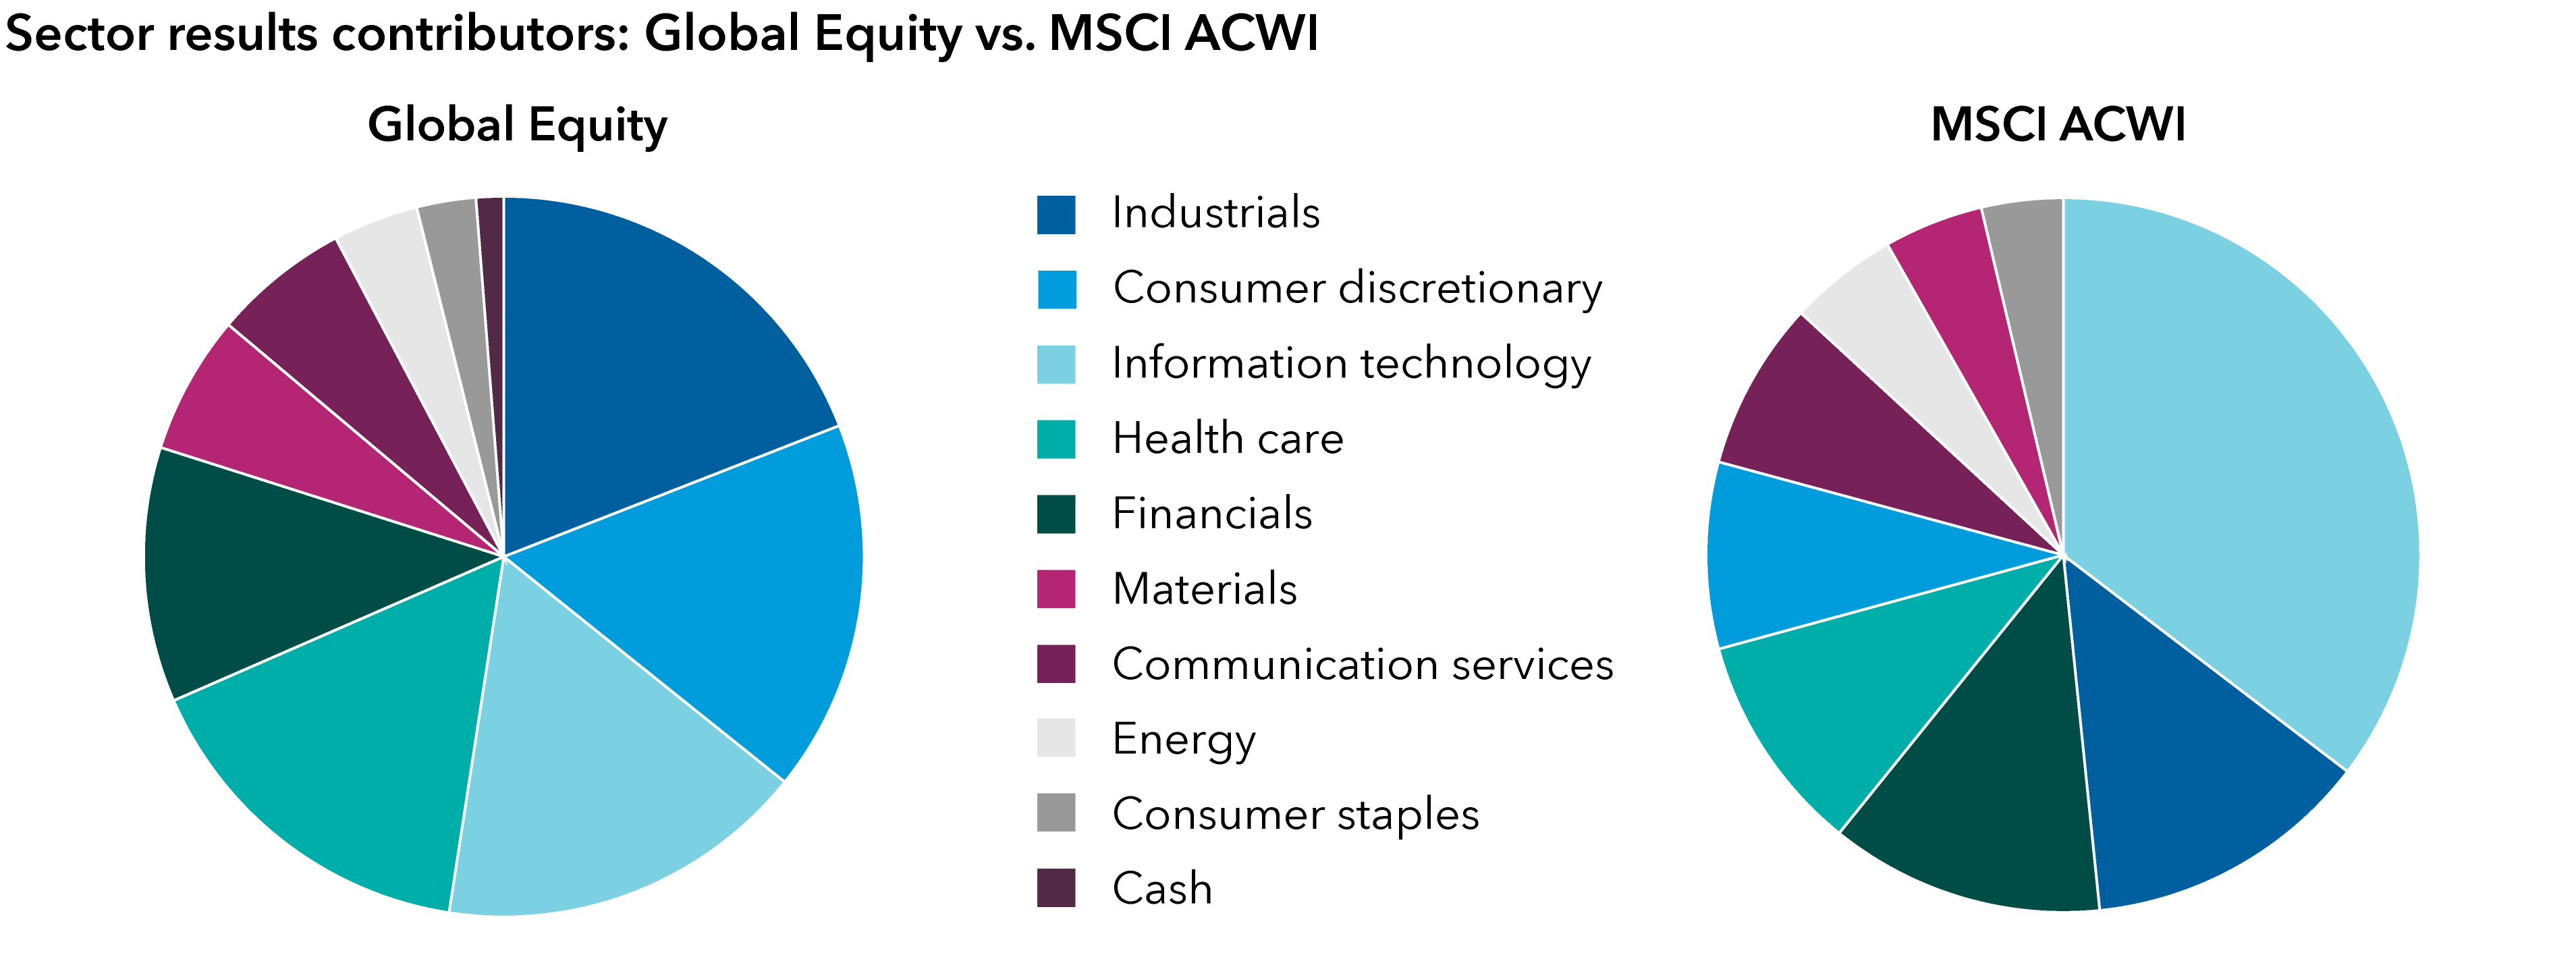 Two pie charts compare the sectors contributing most to one-year results as of August 31, 2023 for Global Equity and the MSCI ACWI benchmark index. The sectors contributing most to results for Global Equity are ranked as follows: Industrials (19.1%), consumer discretionary (16.7%), information technology (16.7%), health care (16.0%), financials (11.5%), materials (6.2%), communication services (6.1%), energy (3.8%) and consumer staples (2.7%). The sectors contributing most to results for the MSCI ACWI benchmark are ranked as follows: information technology (35.9%), industrials (13.2%), financials (12.6%), health care (10.1%), consumer discretionary (8.6%), communication services (7.8%), energy (5.0%), materials (4.6%), and consumer staples (3.8%).